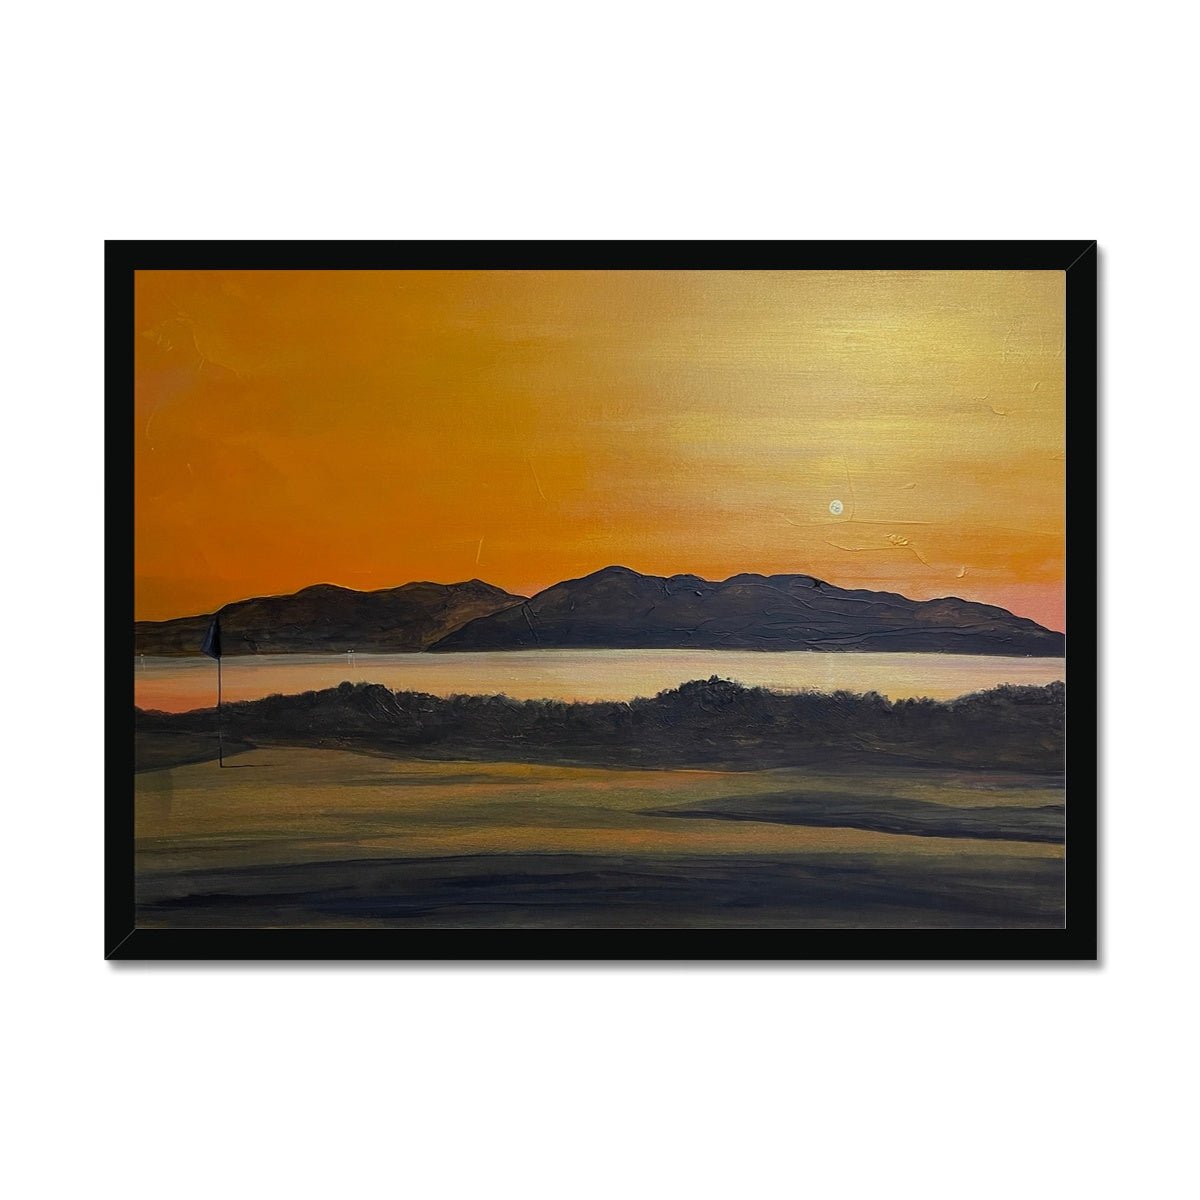 Arran & The 5th Green Royal Troon Golf Course Painting | Framed Prints From Scotland-Framed Prints-Arran Art Gallery-A2 Landscape-Black Frame-Paintings, Prints, Homeware, Art Gifts From Scotland By Scottish Artist Kevin Hunter